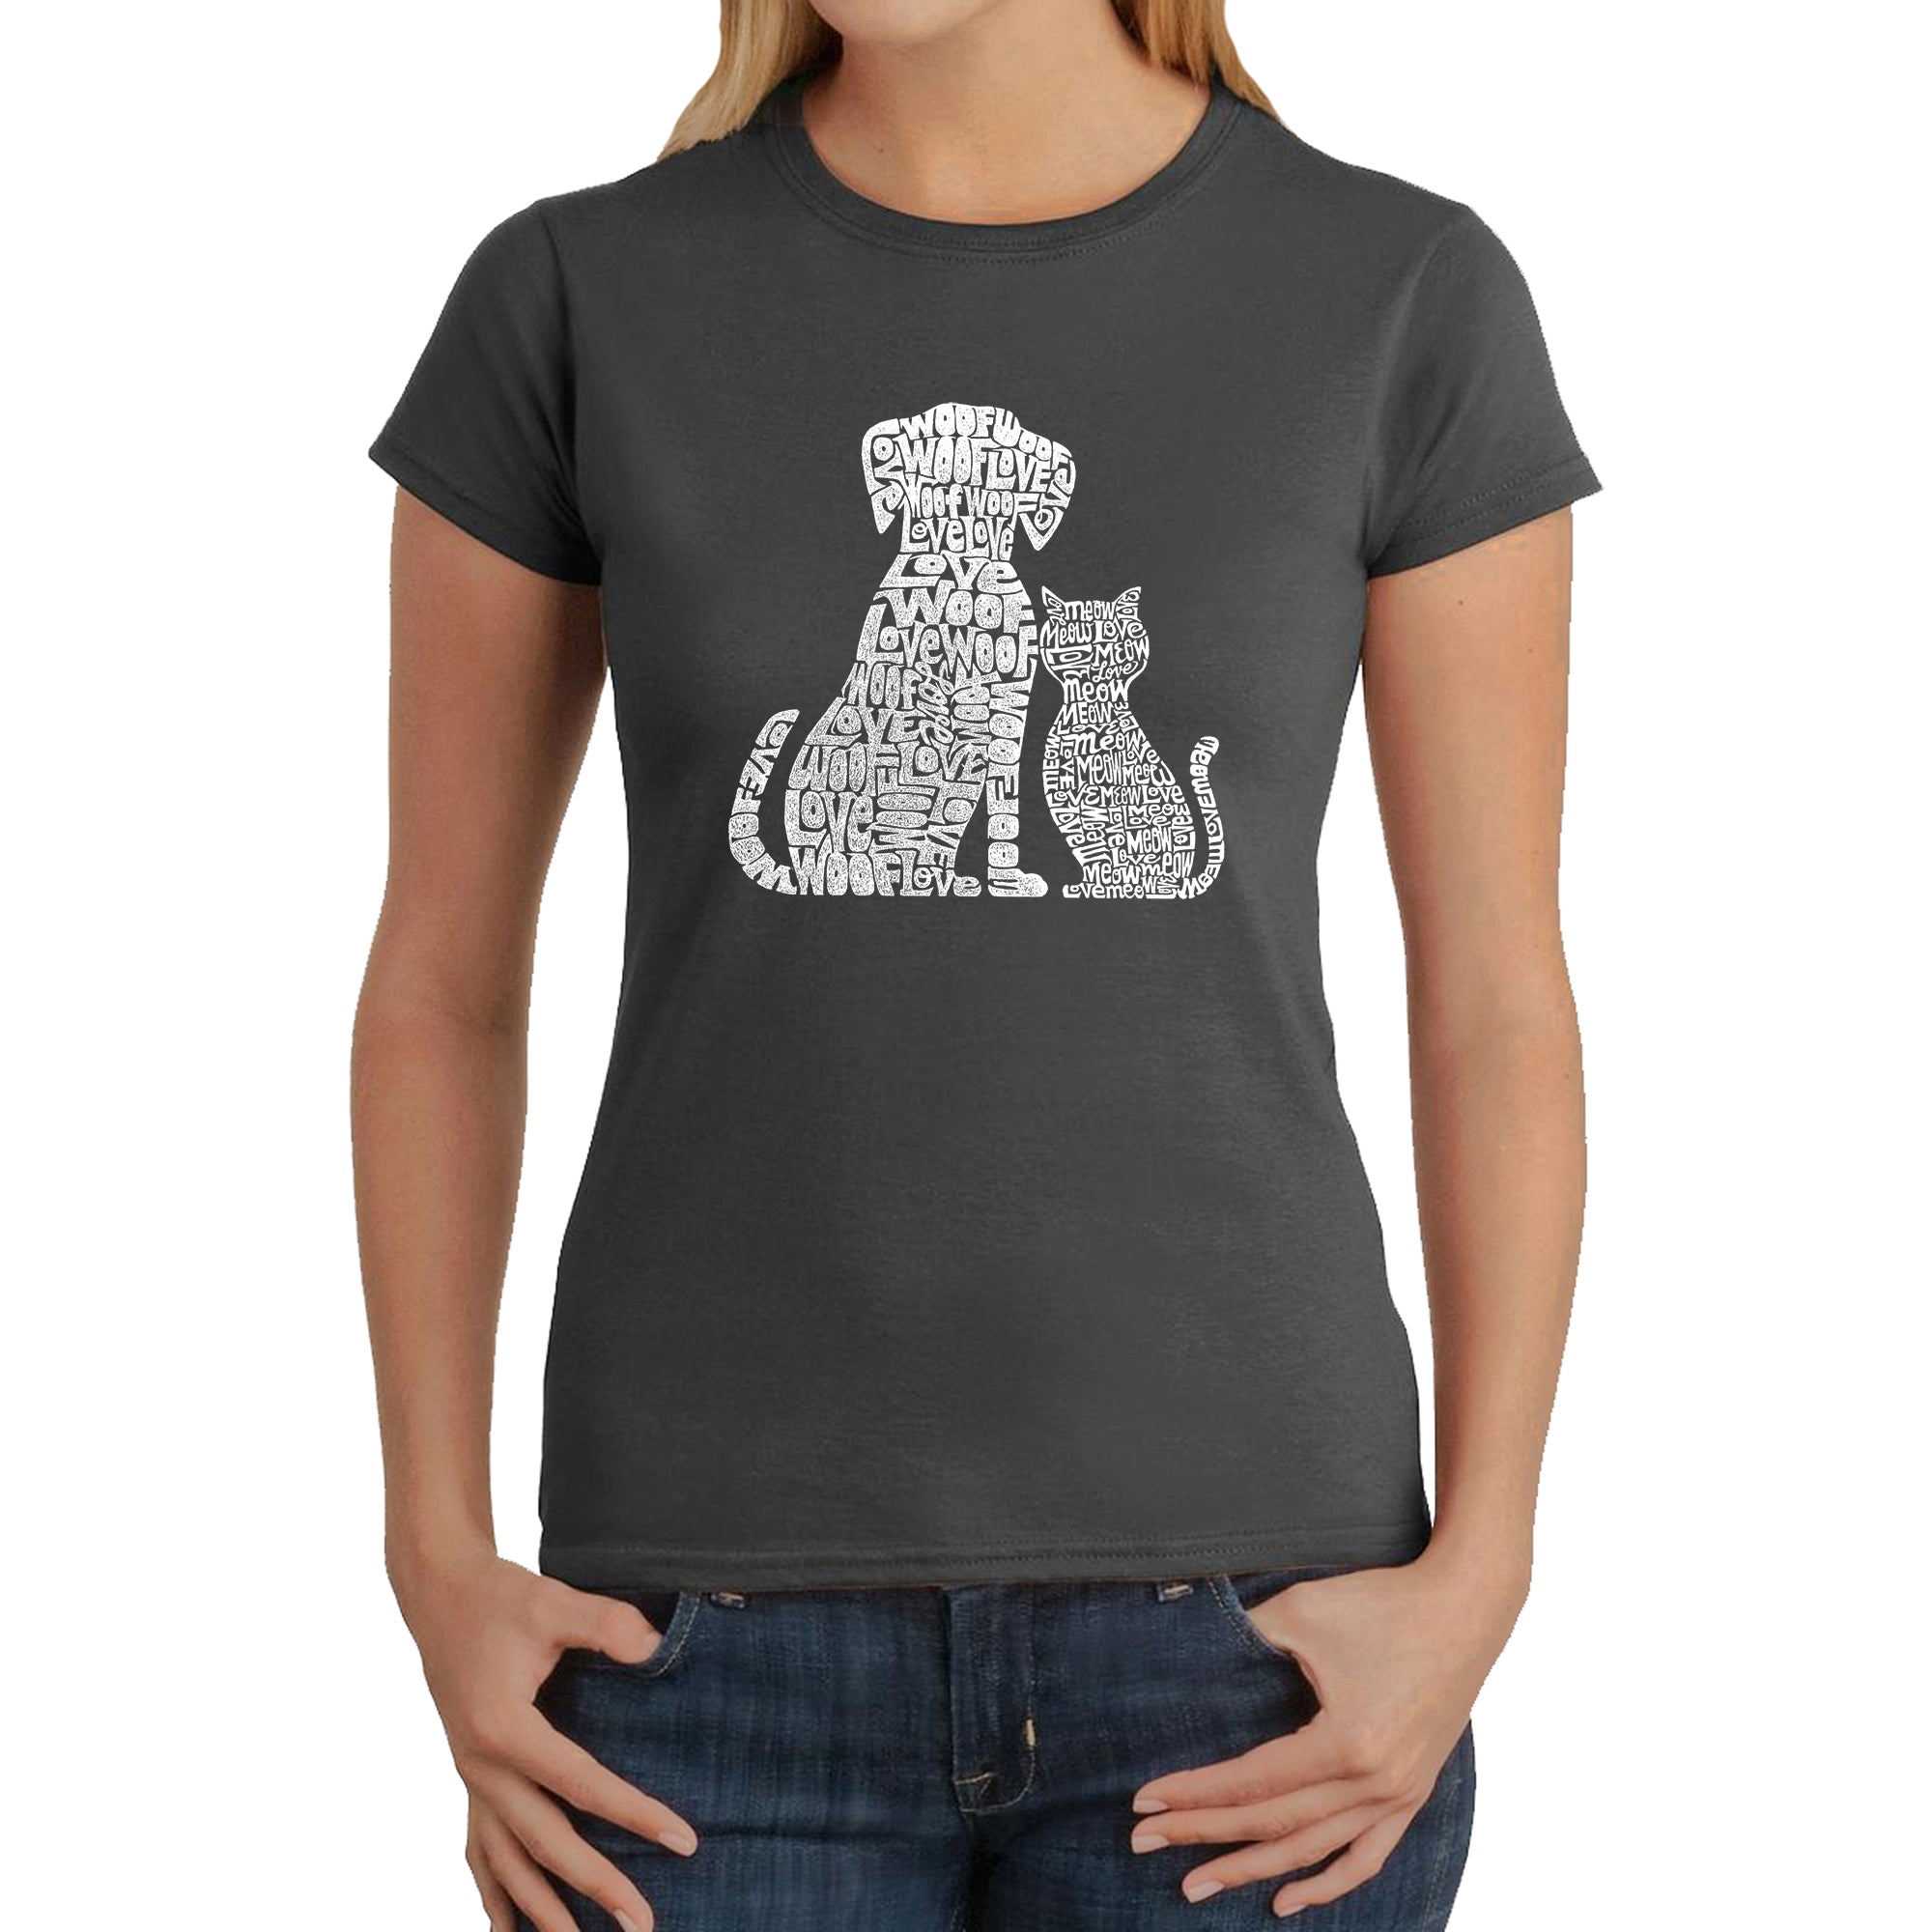 Dogs And Cats - Women's Word Art T-Shirt - Grey - XX-Large